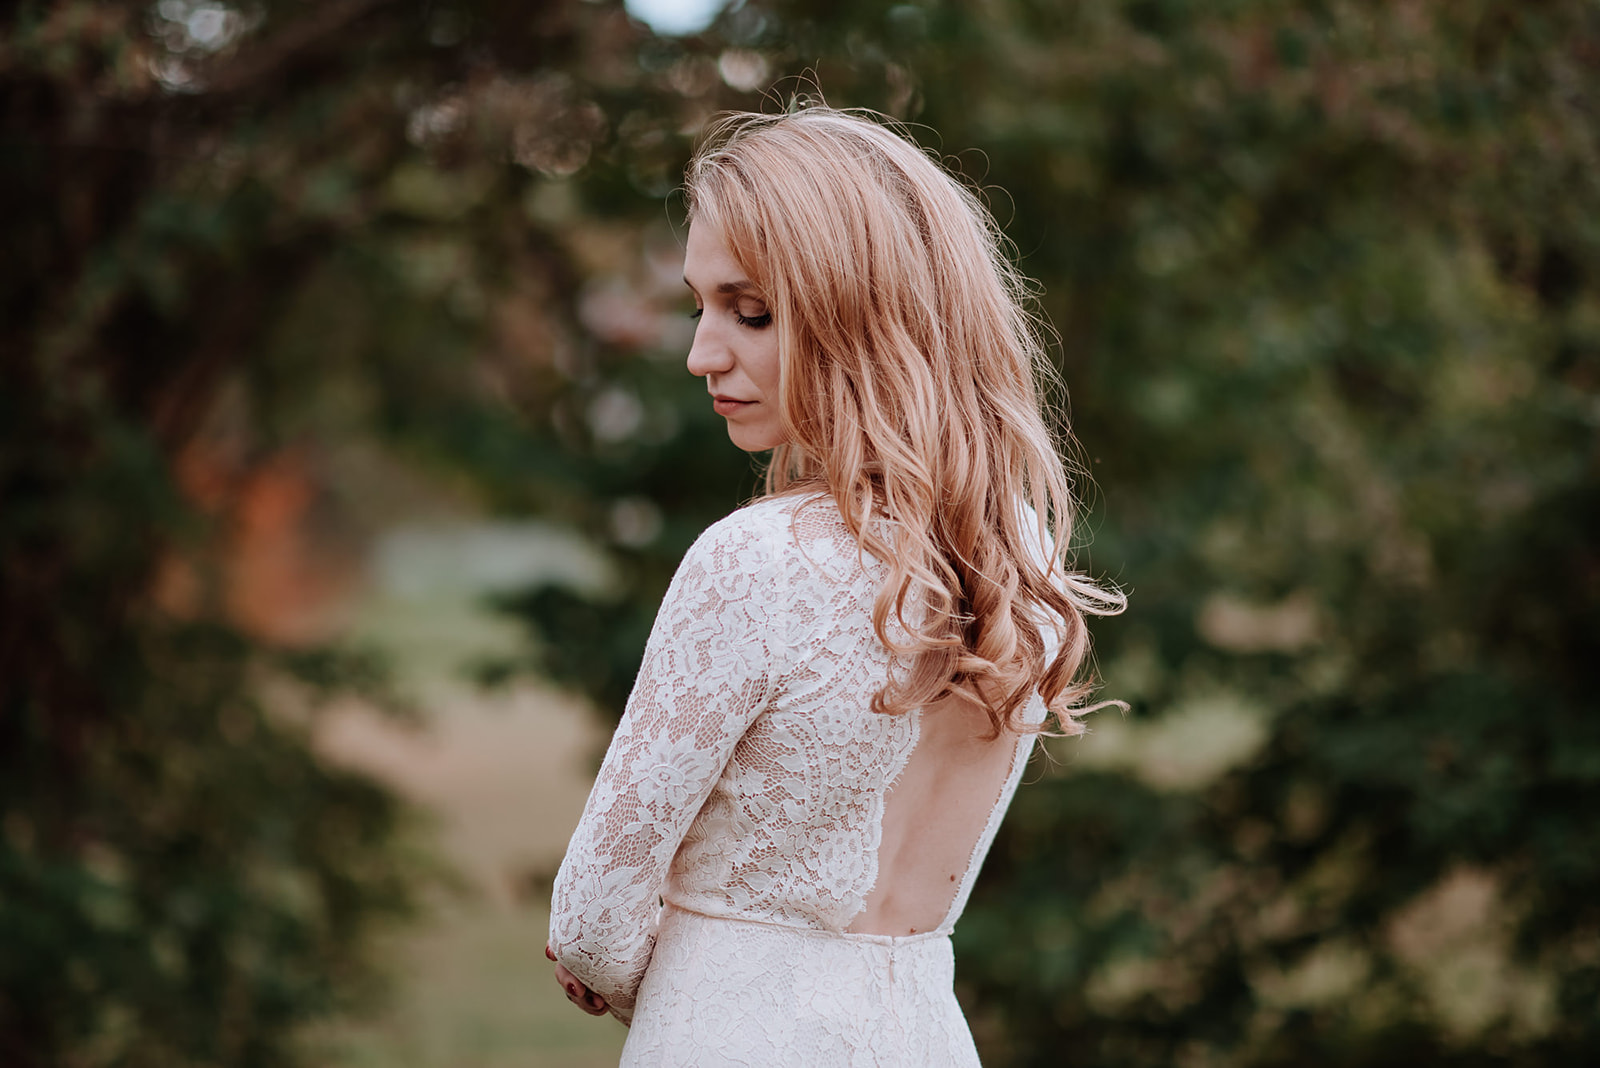 Bride's strawberry blonde hair cascades down her open back with her arms and shoulders framed in a vintage lace dress.